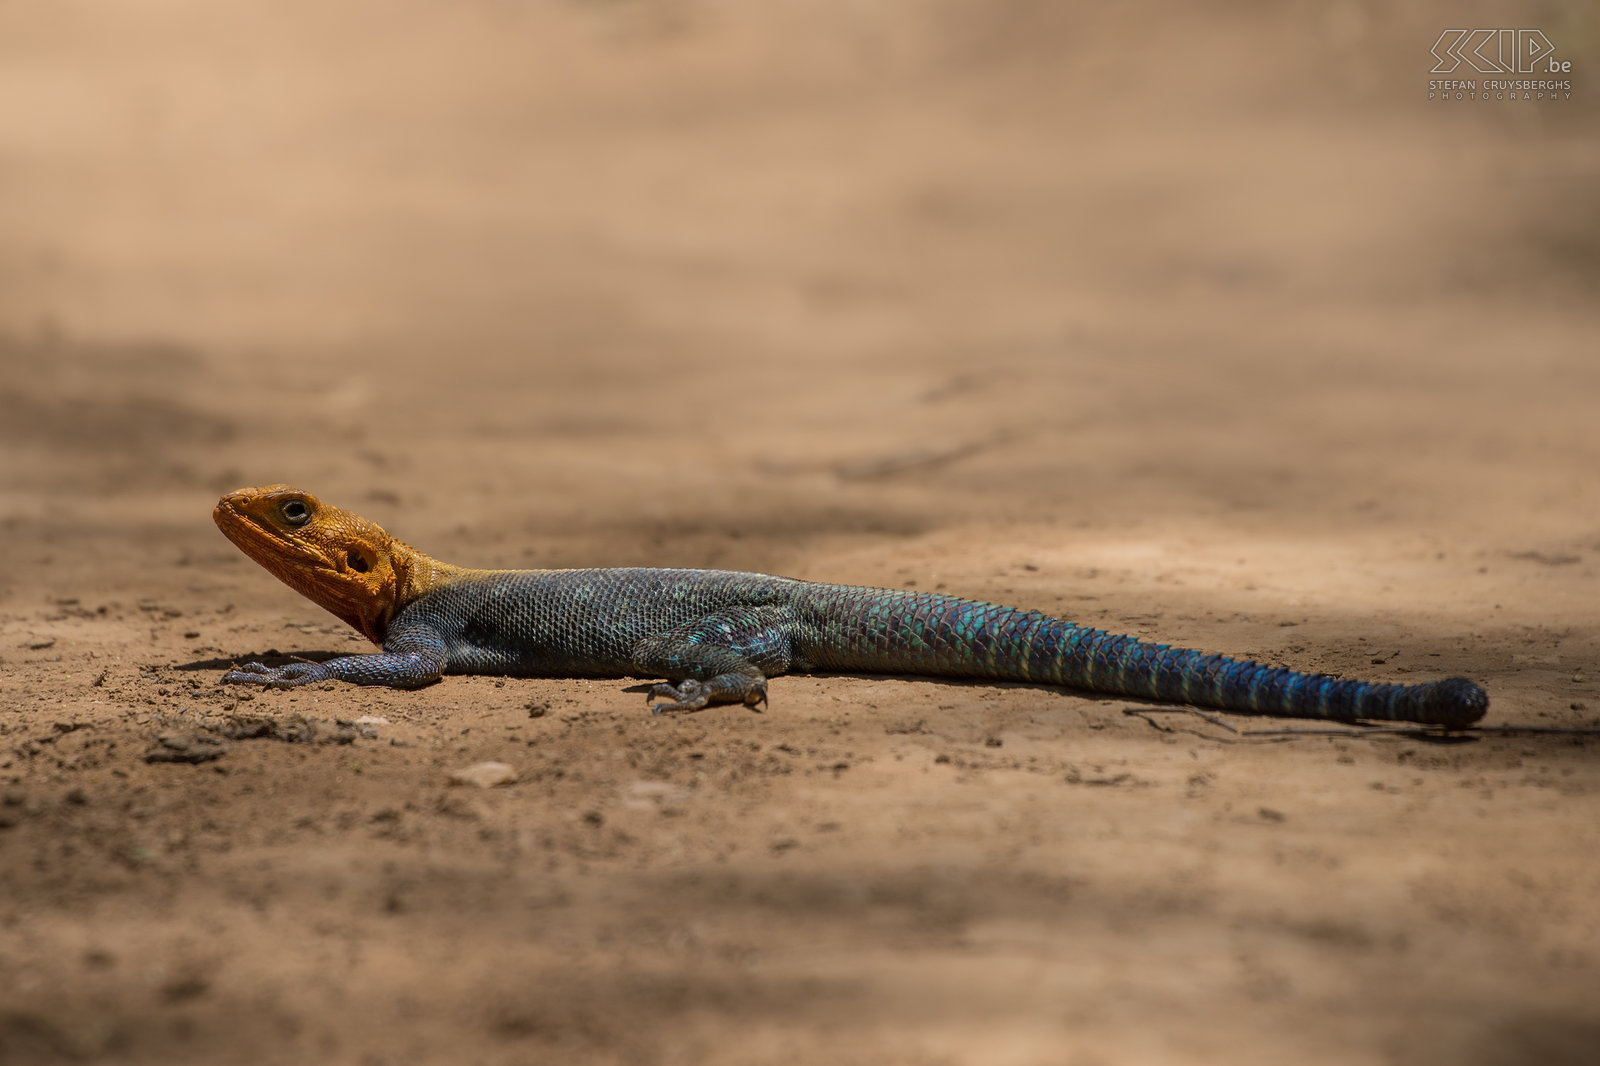 Samburu - Agama lizard The common agama lizard (Agama agama) is a species of lizard that can be found in Eastern Africa. In the breading season the males have a head and neck that turns bright orange and the body is blue. Outside the breading season they are plain brown.  Stefan Cruysberghs